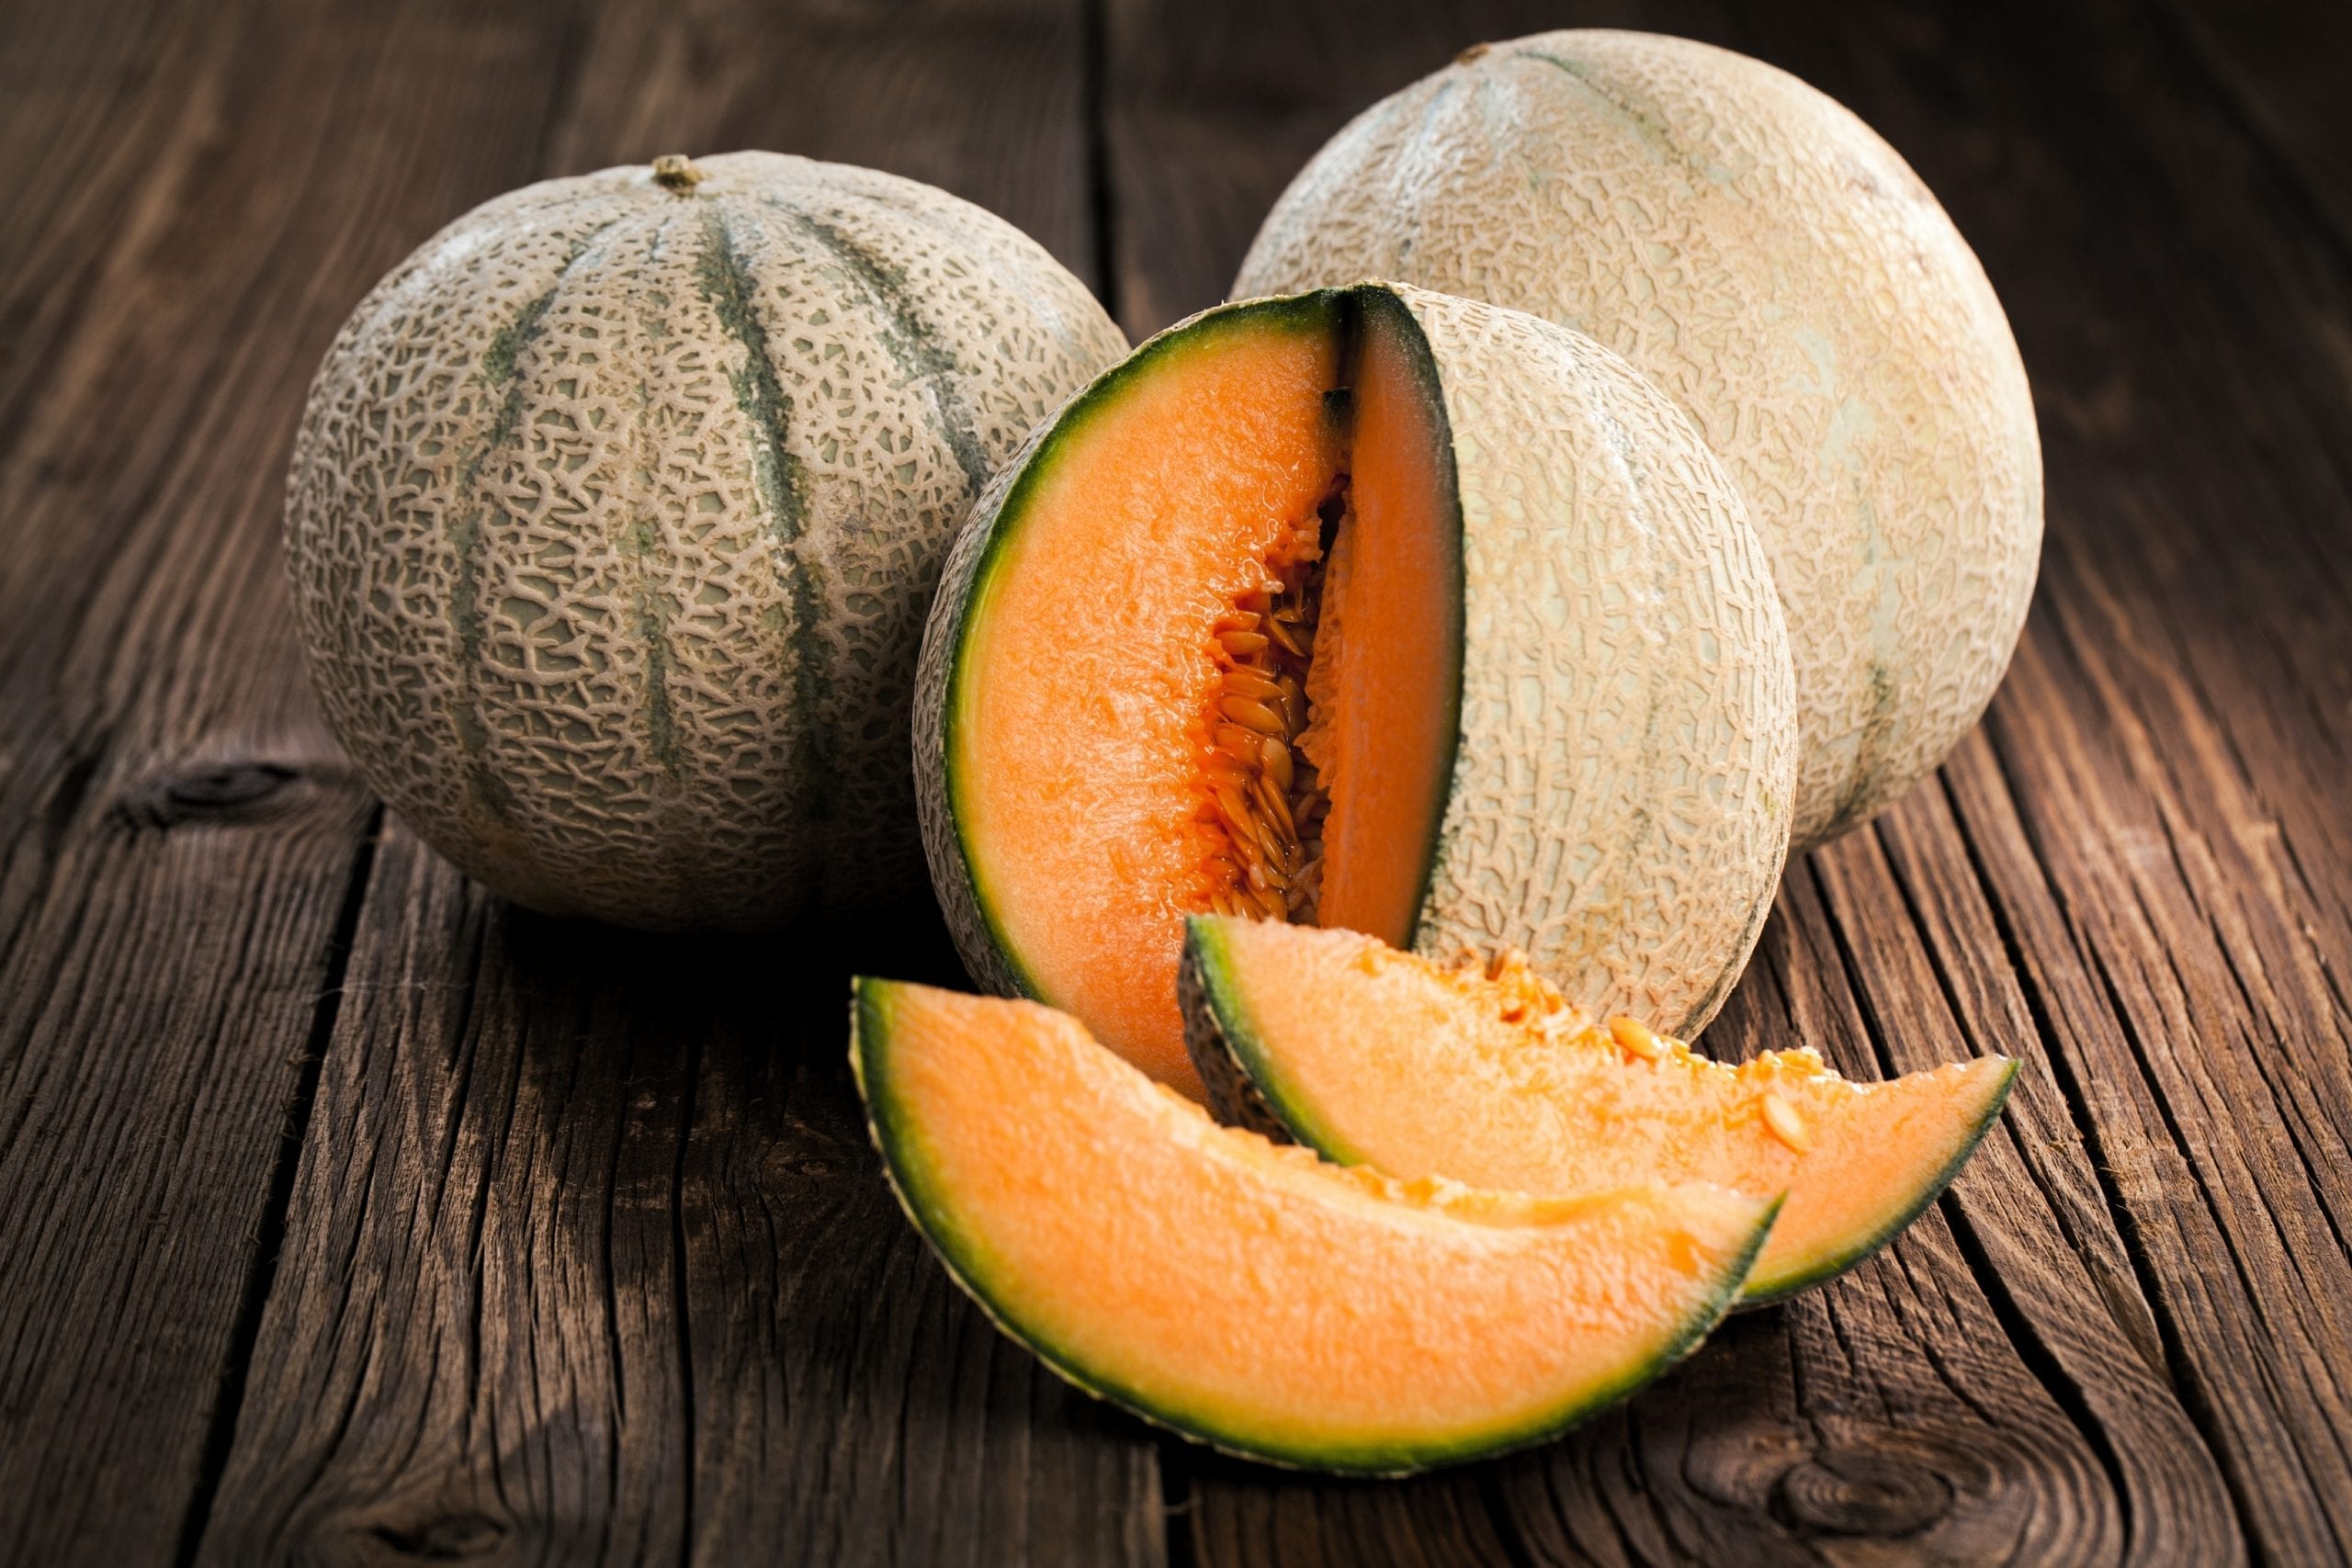 Imported Salmonella-Tainted Melons Sicken 117 in 10 States